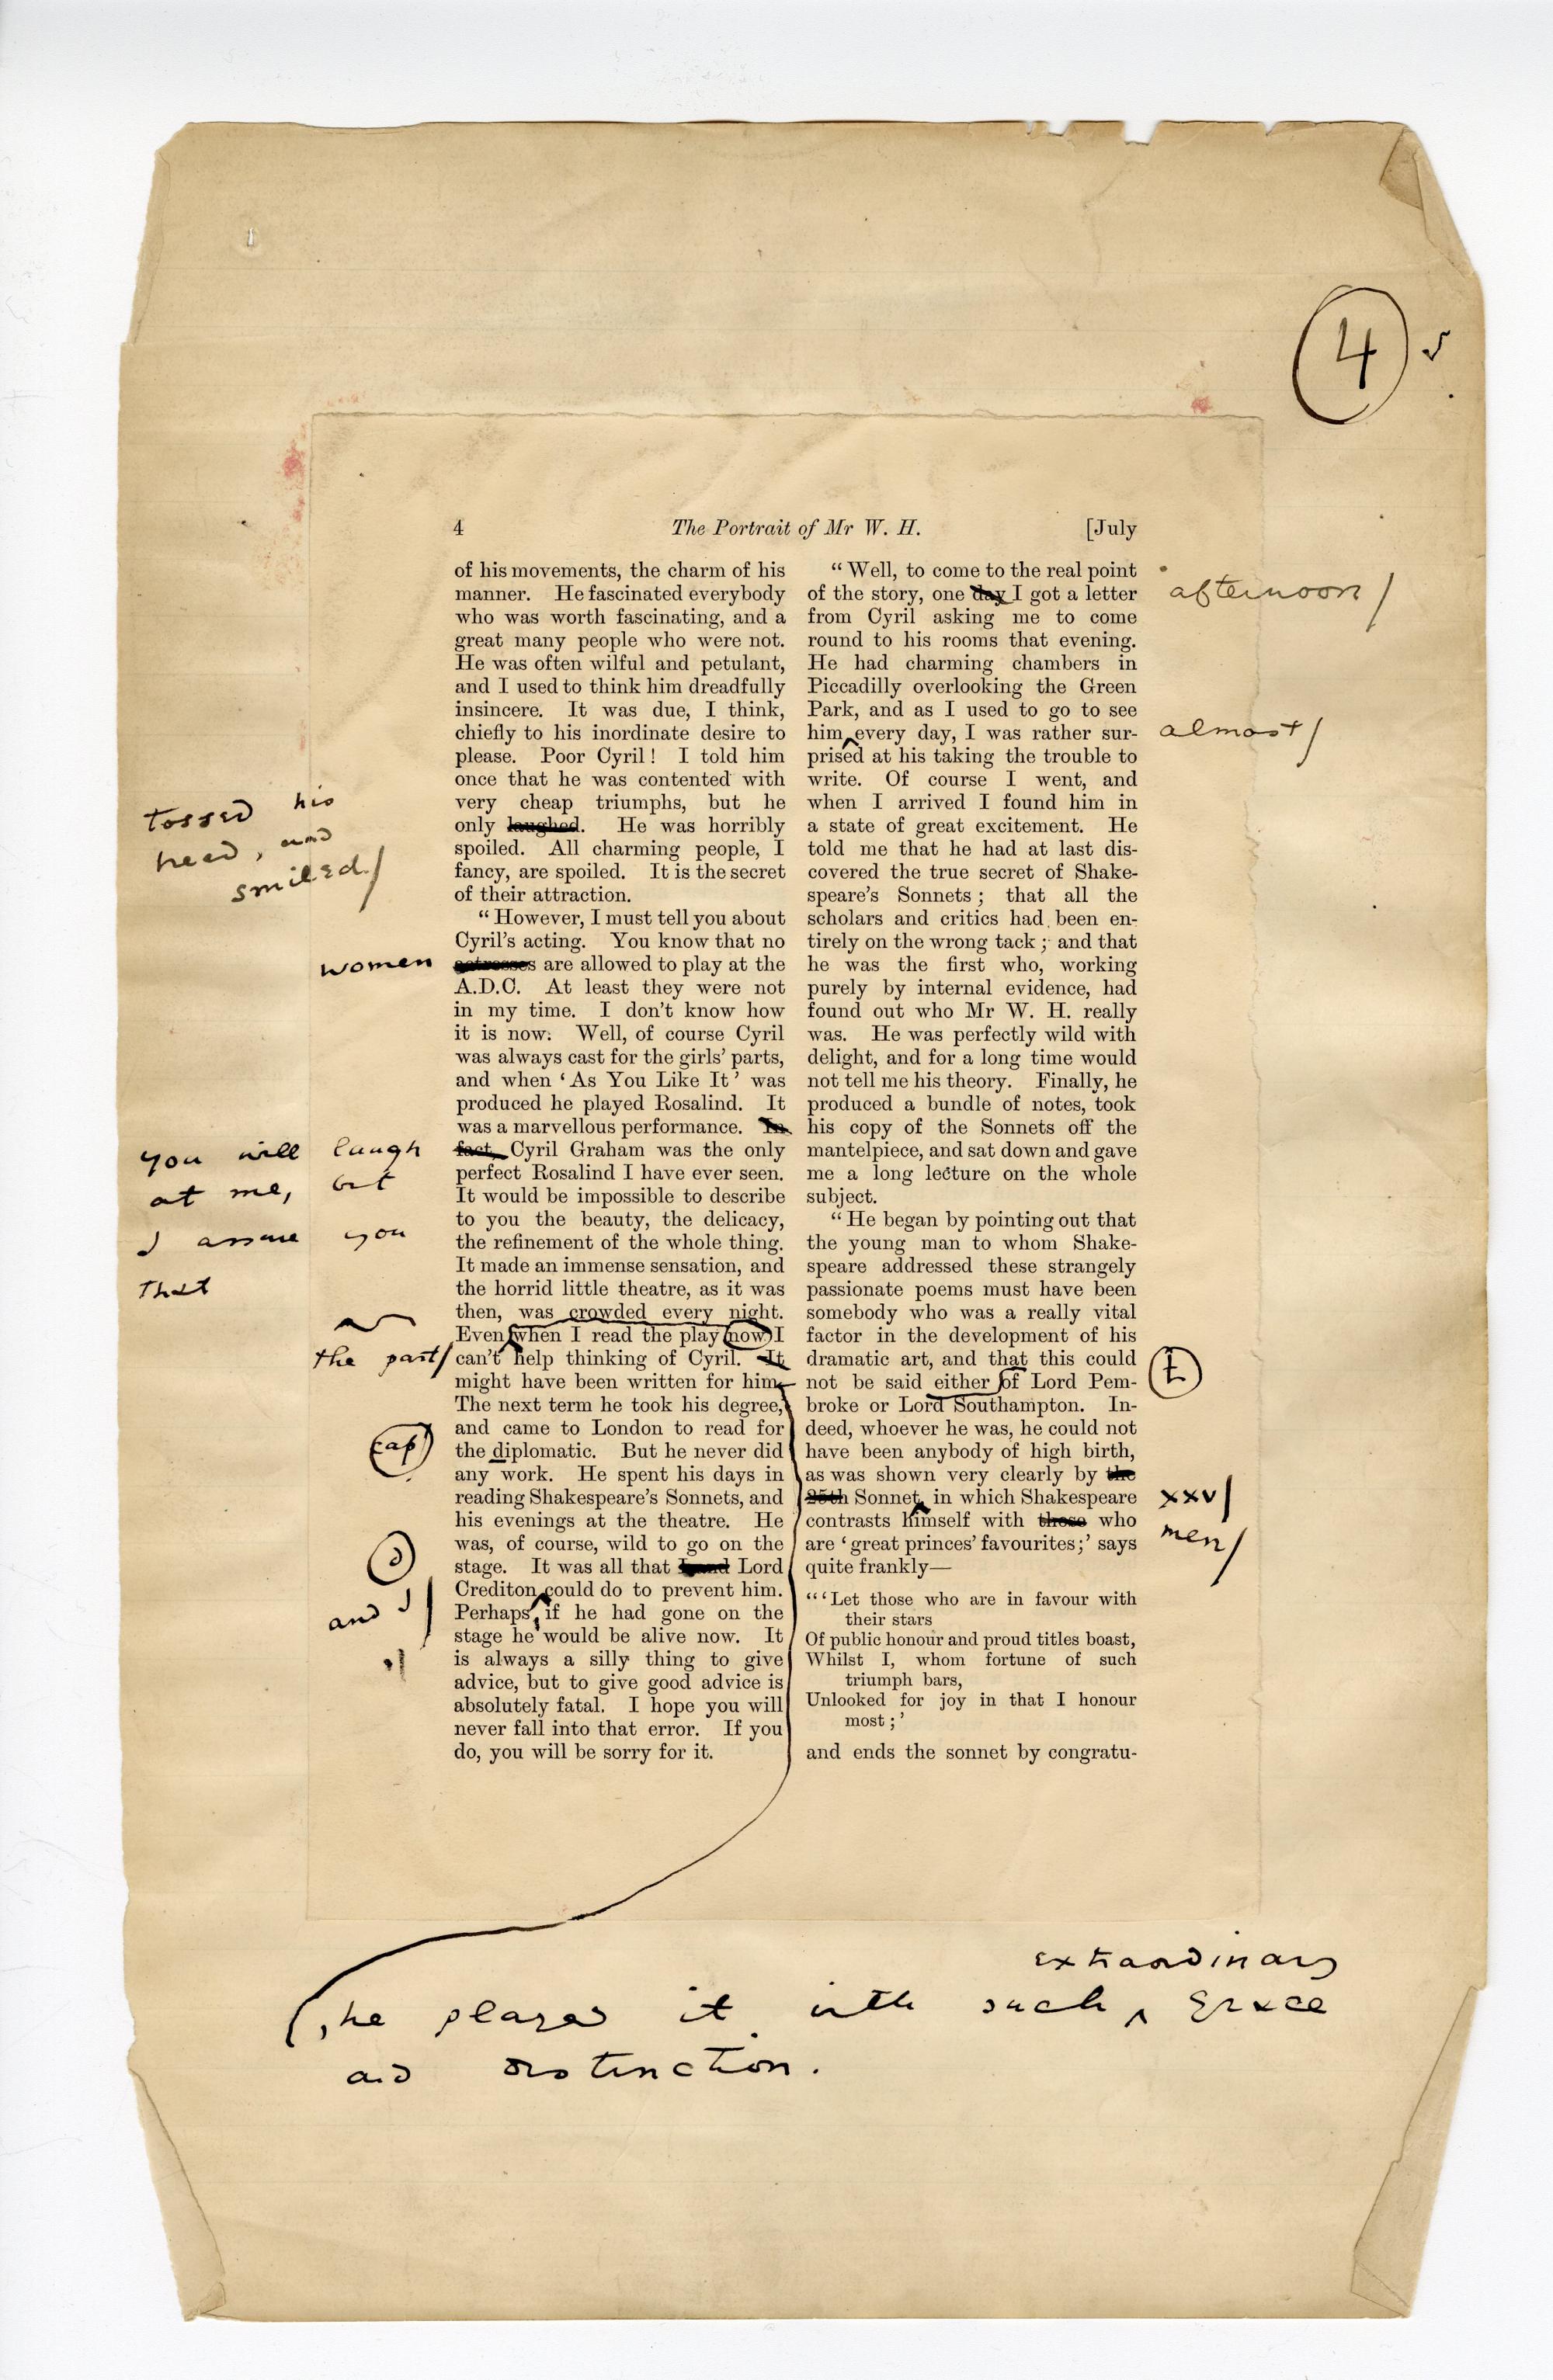 Folio 4 contains a full page 4 from Blackwood's printing annotated in Wilde's hand.